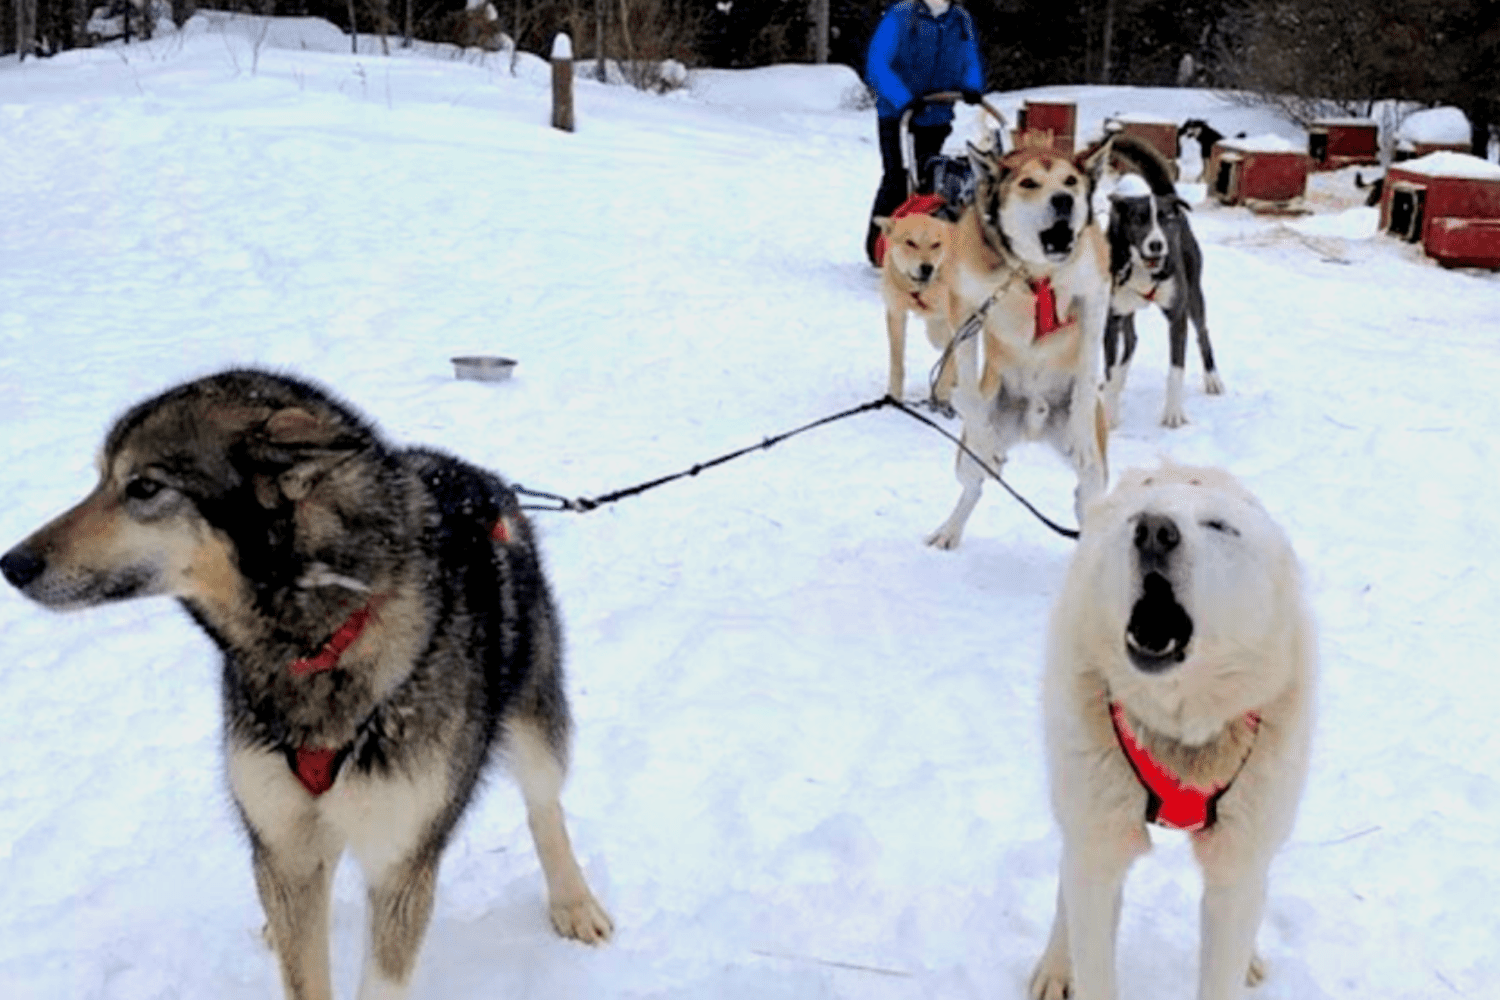 Dog sledding and winter fun - Adventures in Good Company